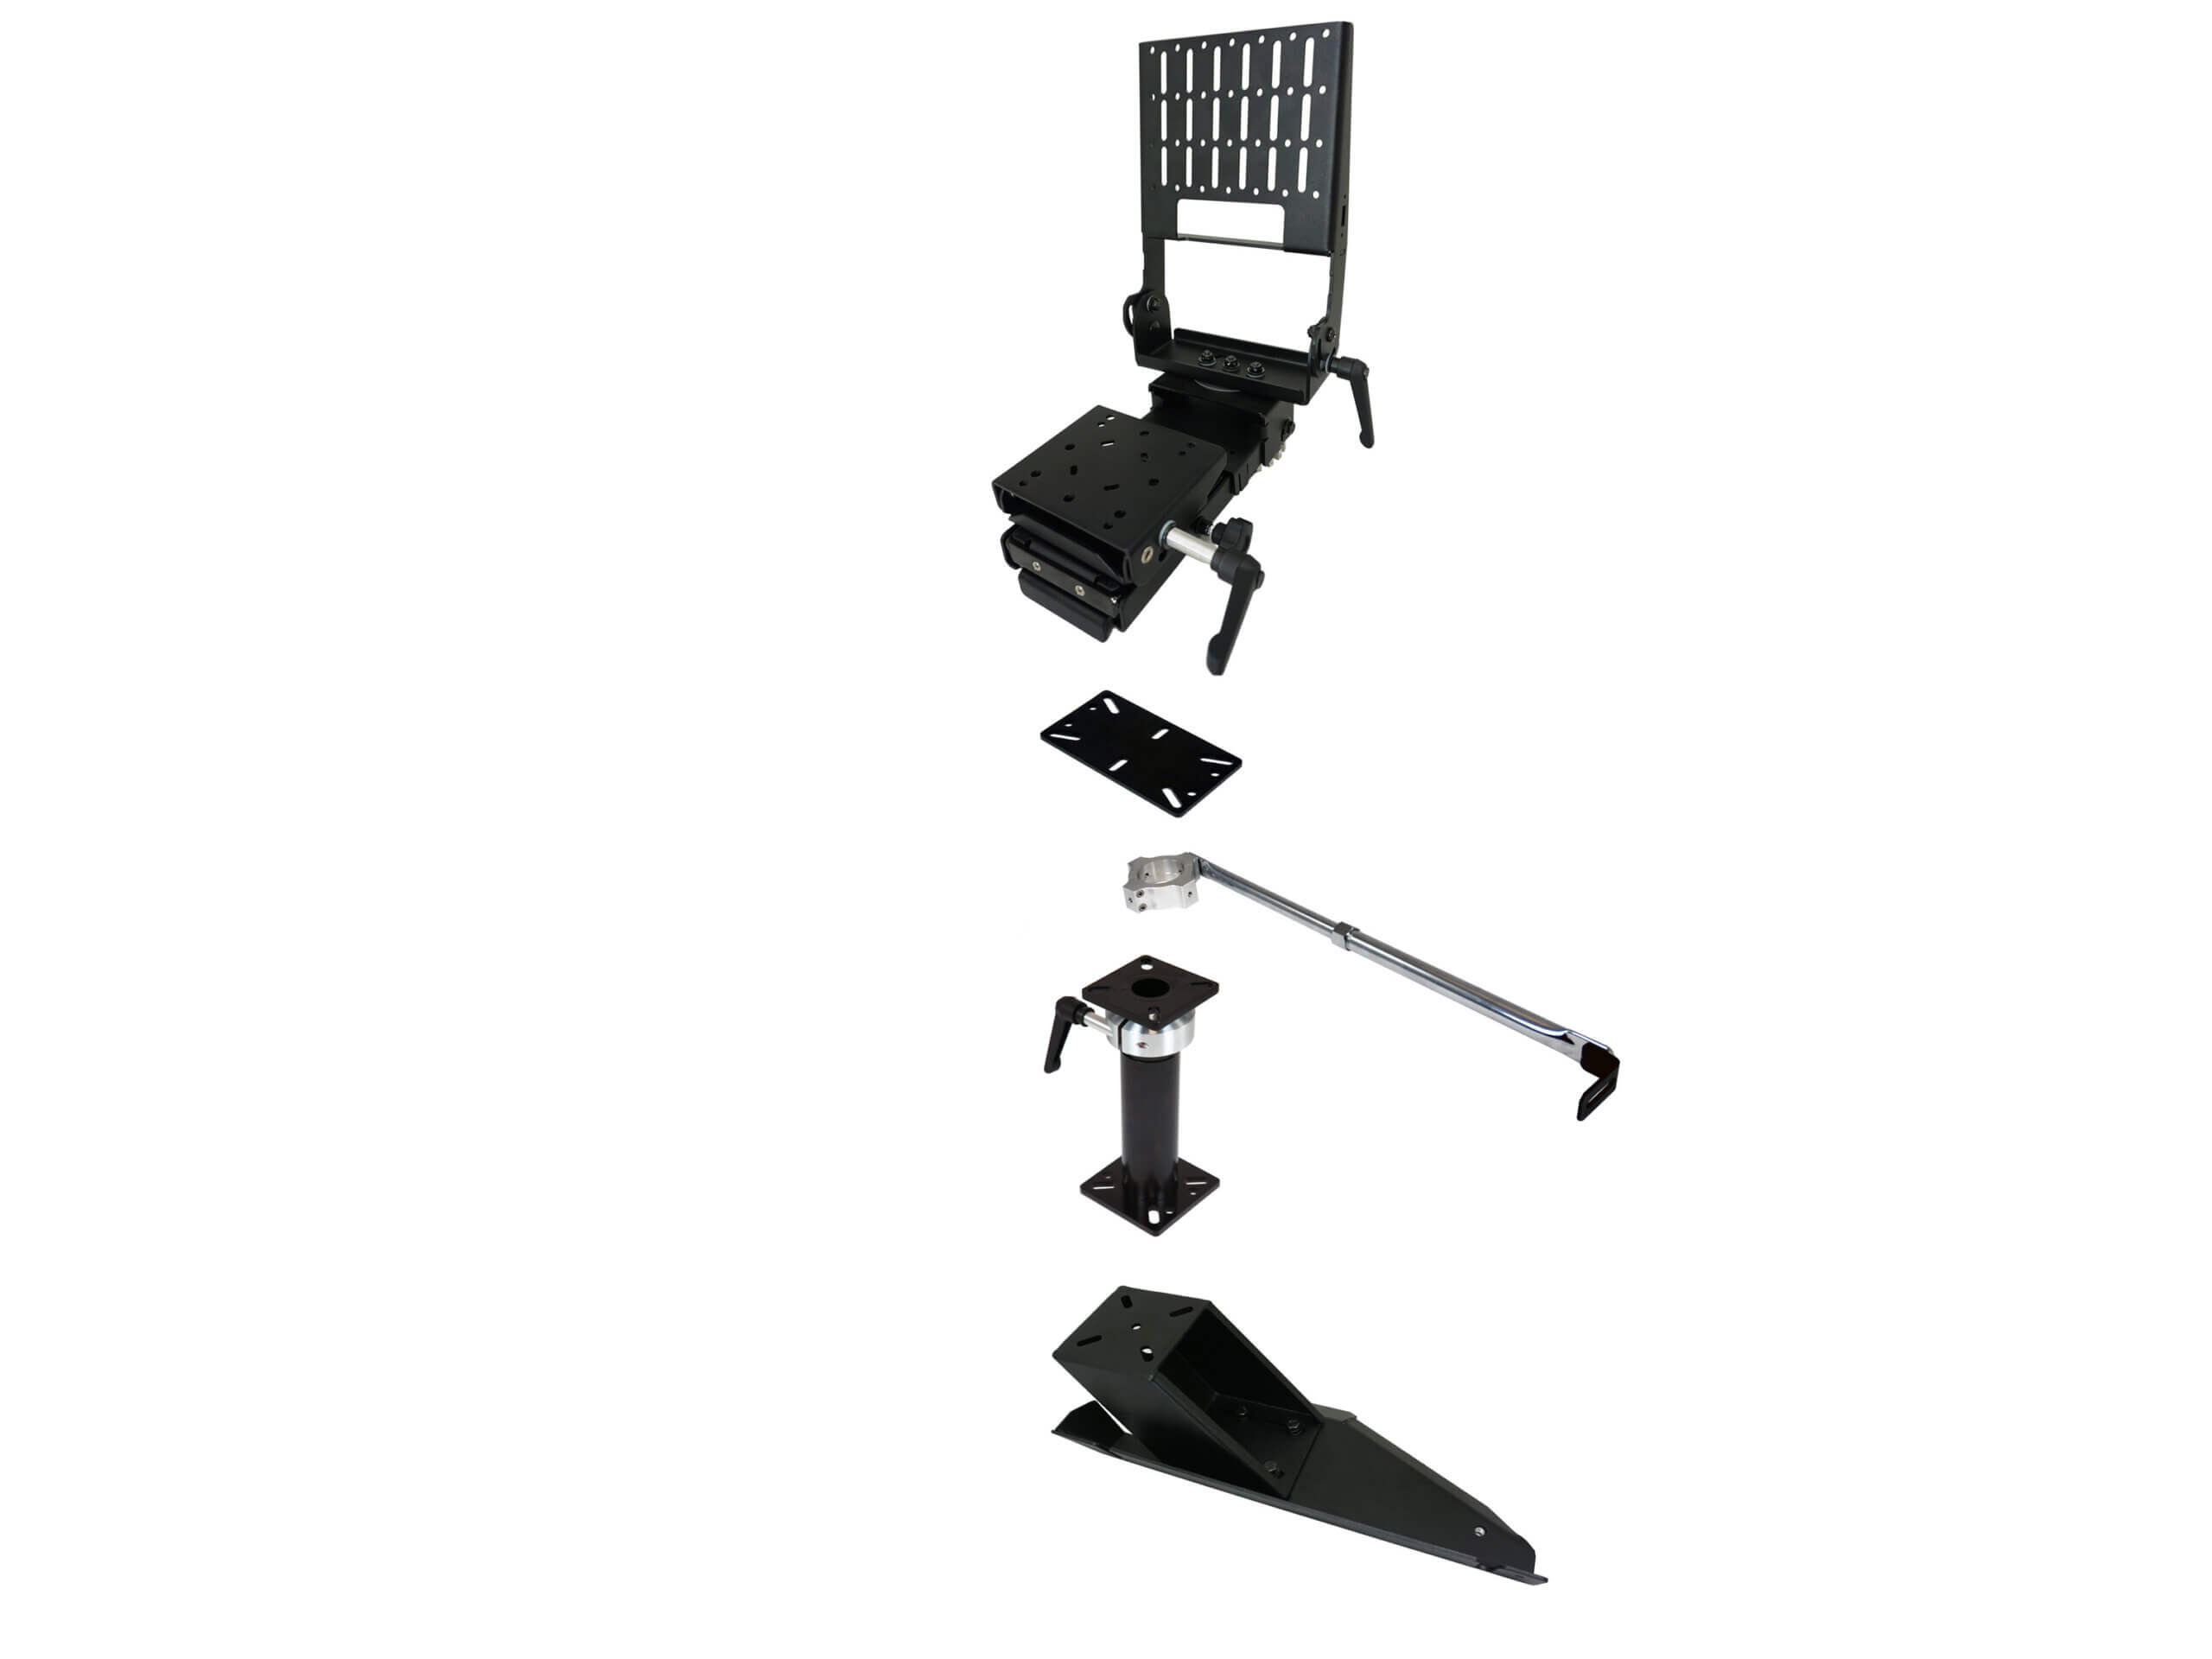 Premium Tablet Pedestal Mount Package For 2013-2023 Dodge Ram 1500 Special Services Police Truck, Tradesman & 1500, 2500 & 3500 Retail Pickup And Ram 4500/5500 Chassis Cab Truck With DS Trim Level (Known As “Classic” Body Style)